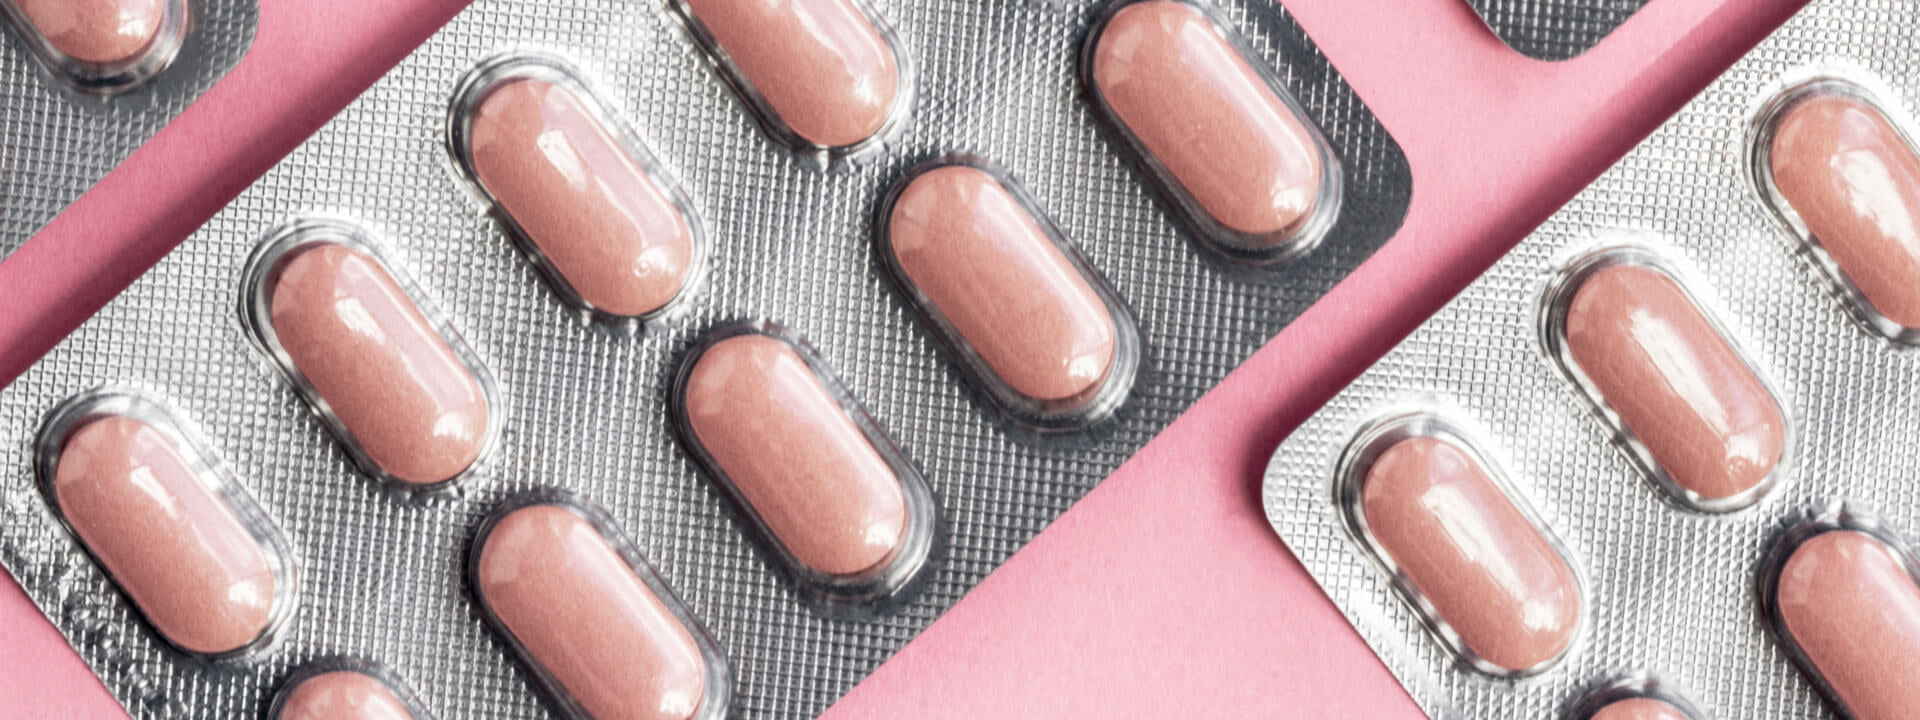 Statins Scrutinized: What You Need To Know